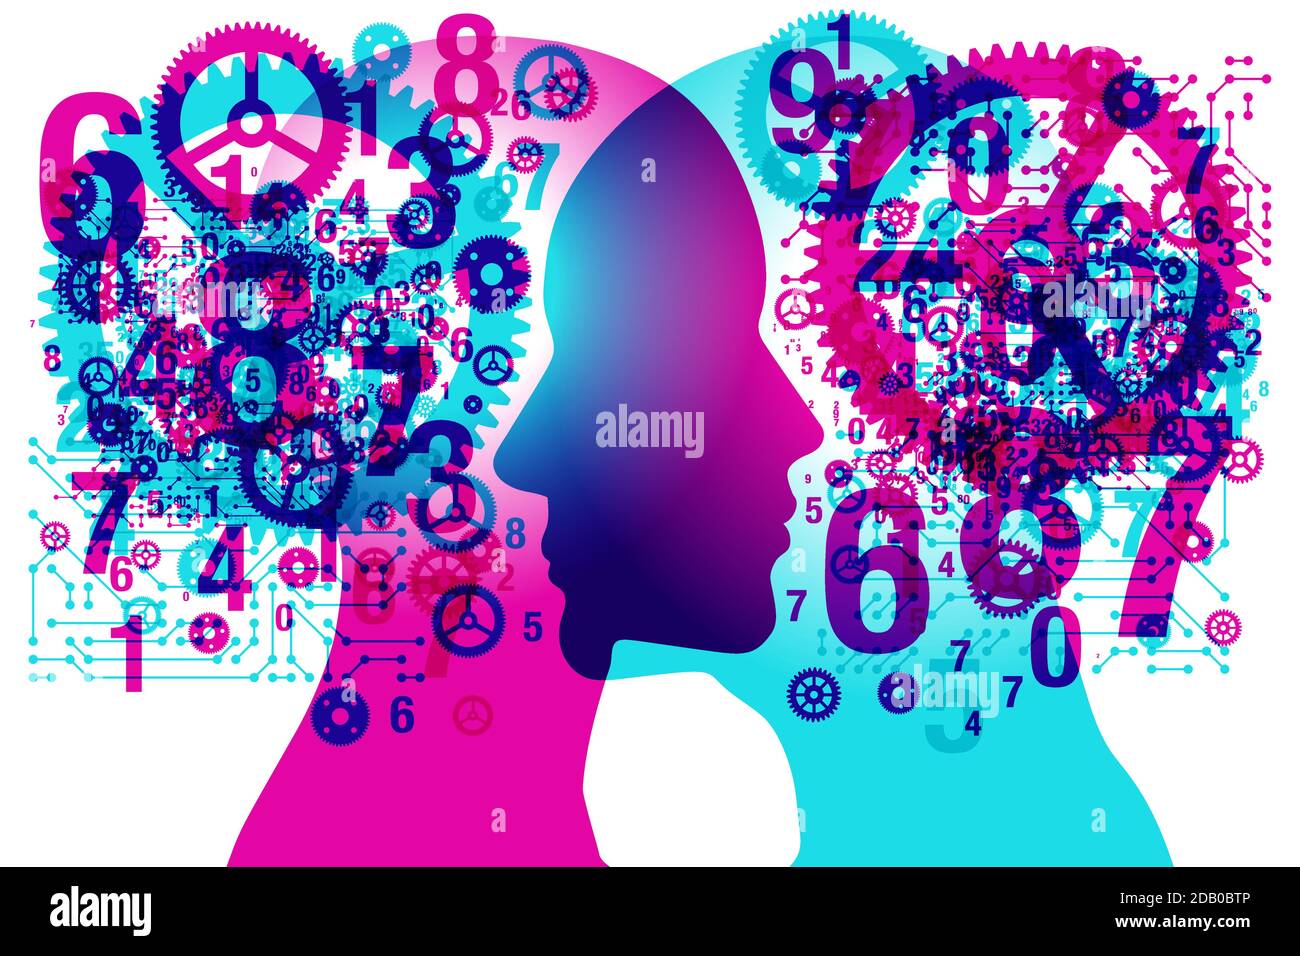 A male and female side silhouette positioned face to face, overlaid with a random set of shapes, gears and numbers. Stock Vector